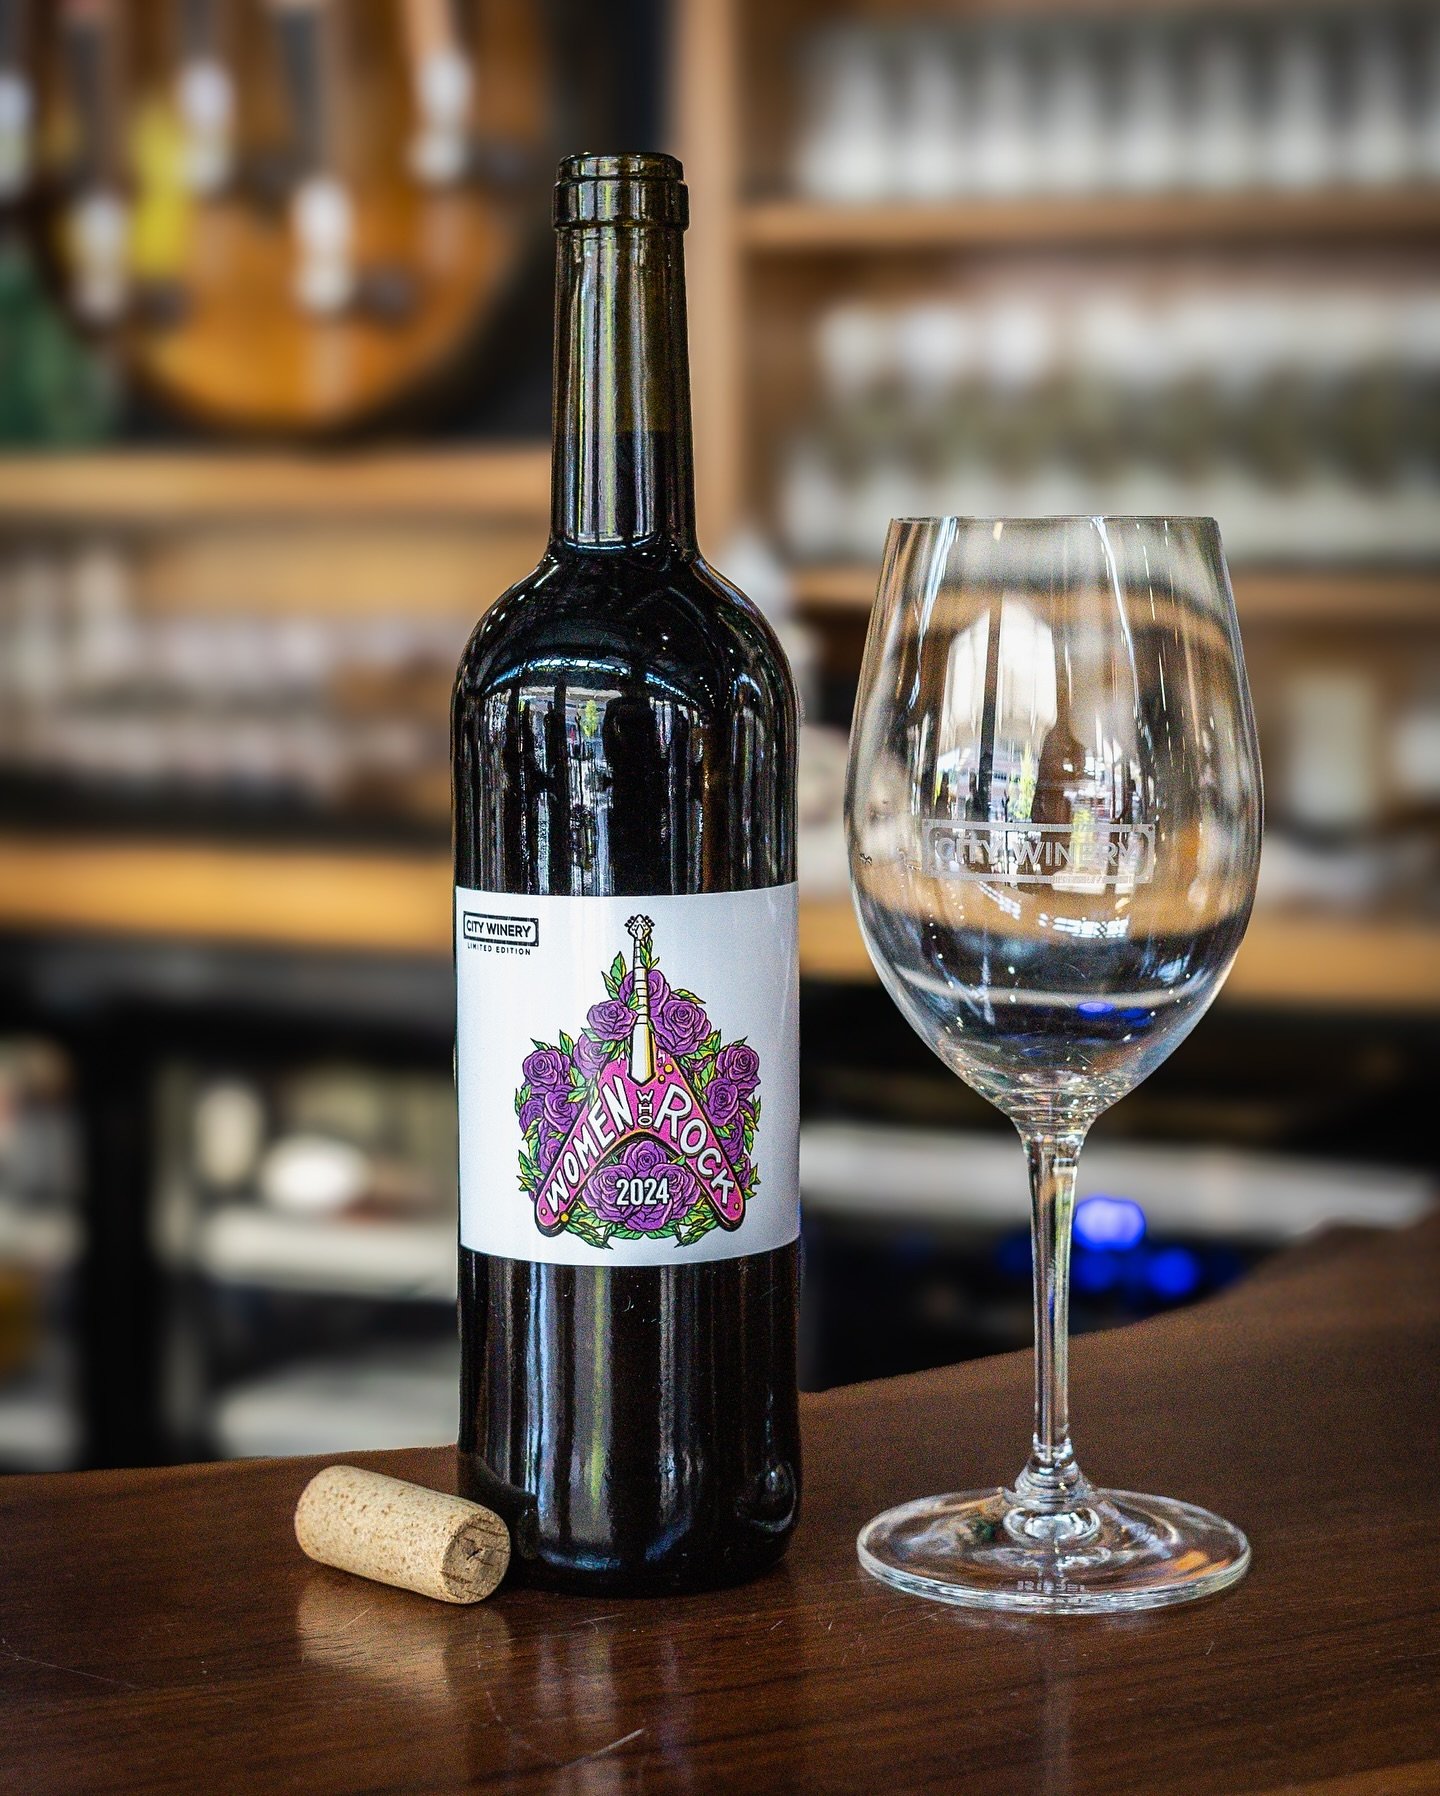 Happy National Wine Day! 🍷

What better way to celebrate than to try our limited edition Women Who Rock Malbec Wine at @citywinery_pgh that&rsquo;s available until the end of May.

$10 from every bottle will benefit understudied and underfunded wome